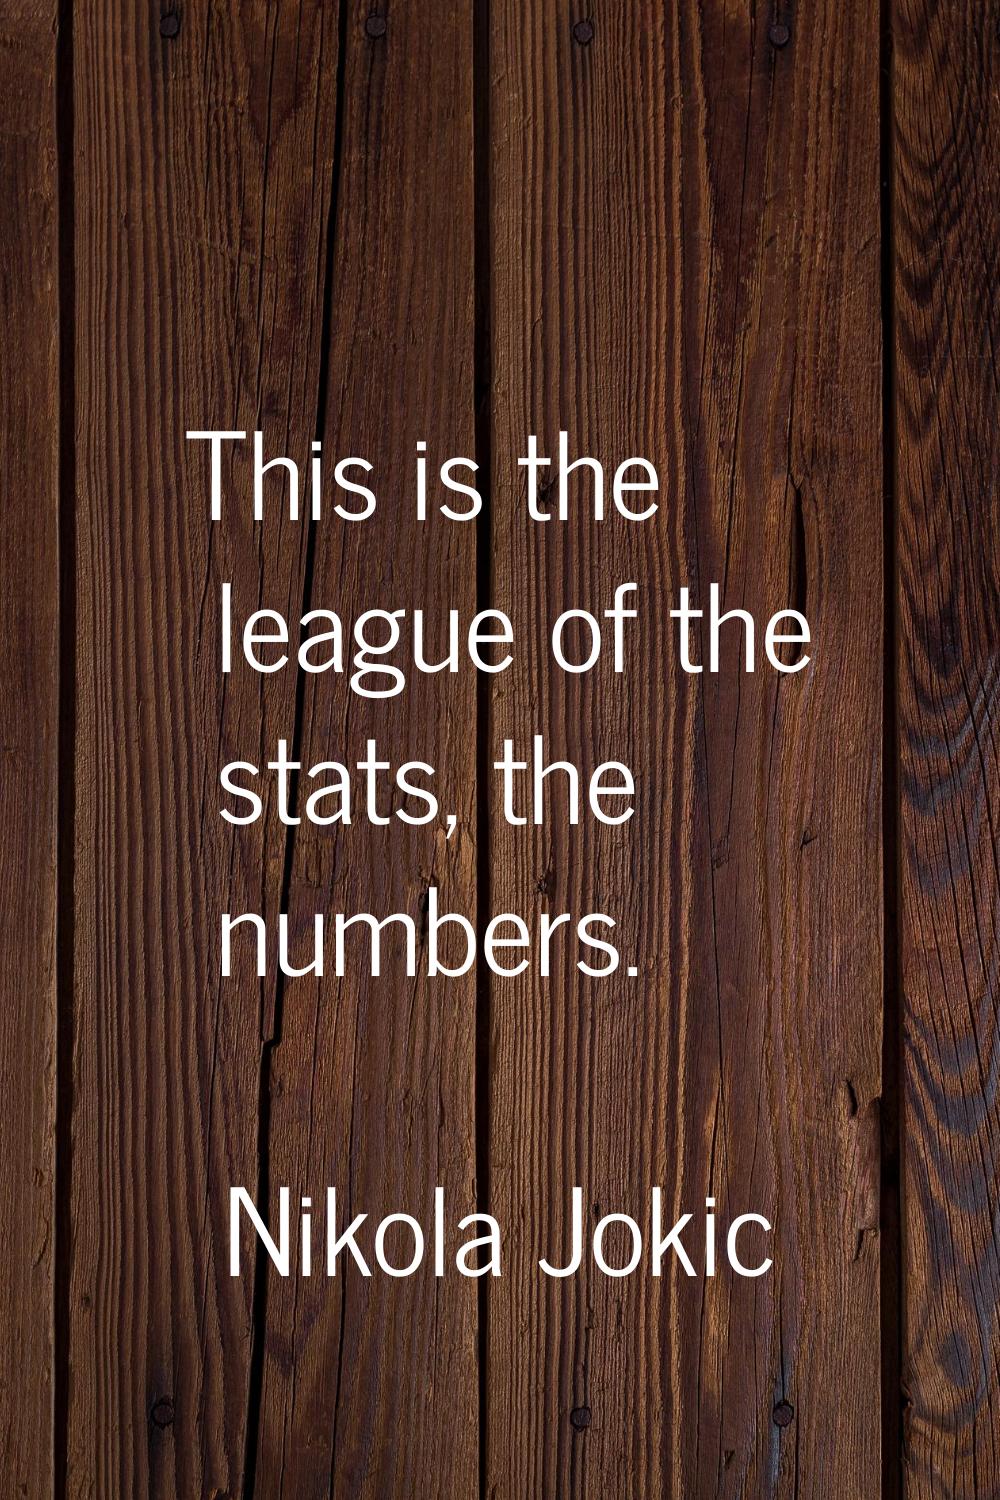 This is the league of the stats, the numbers.